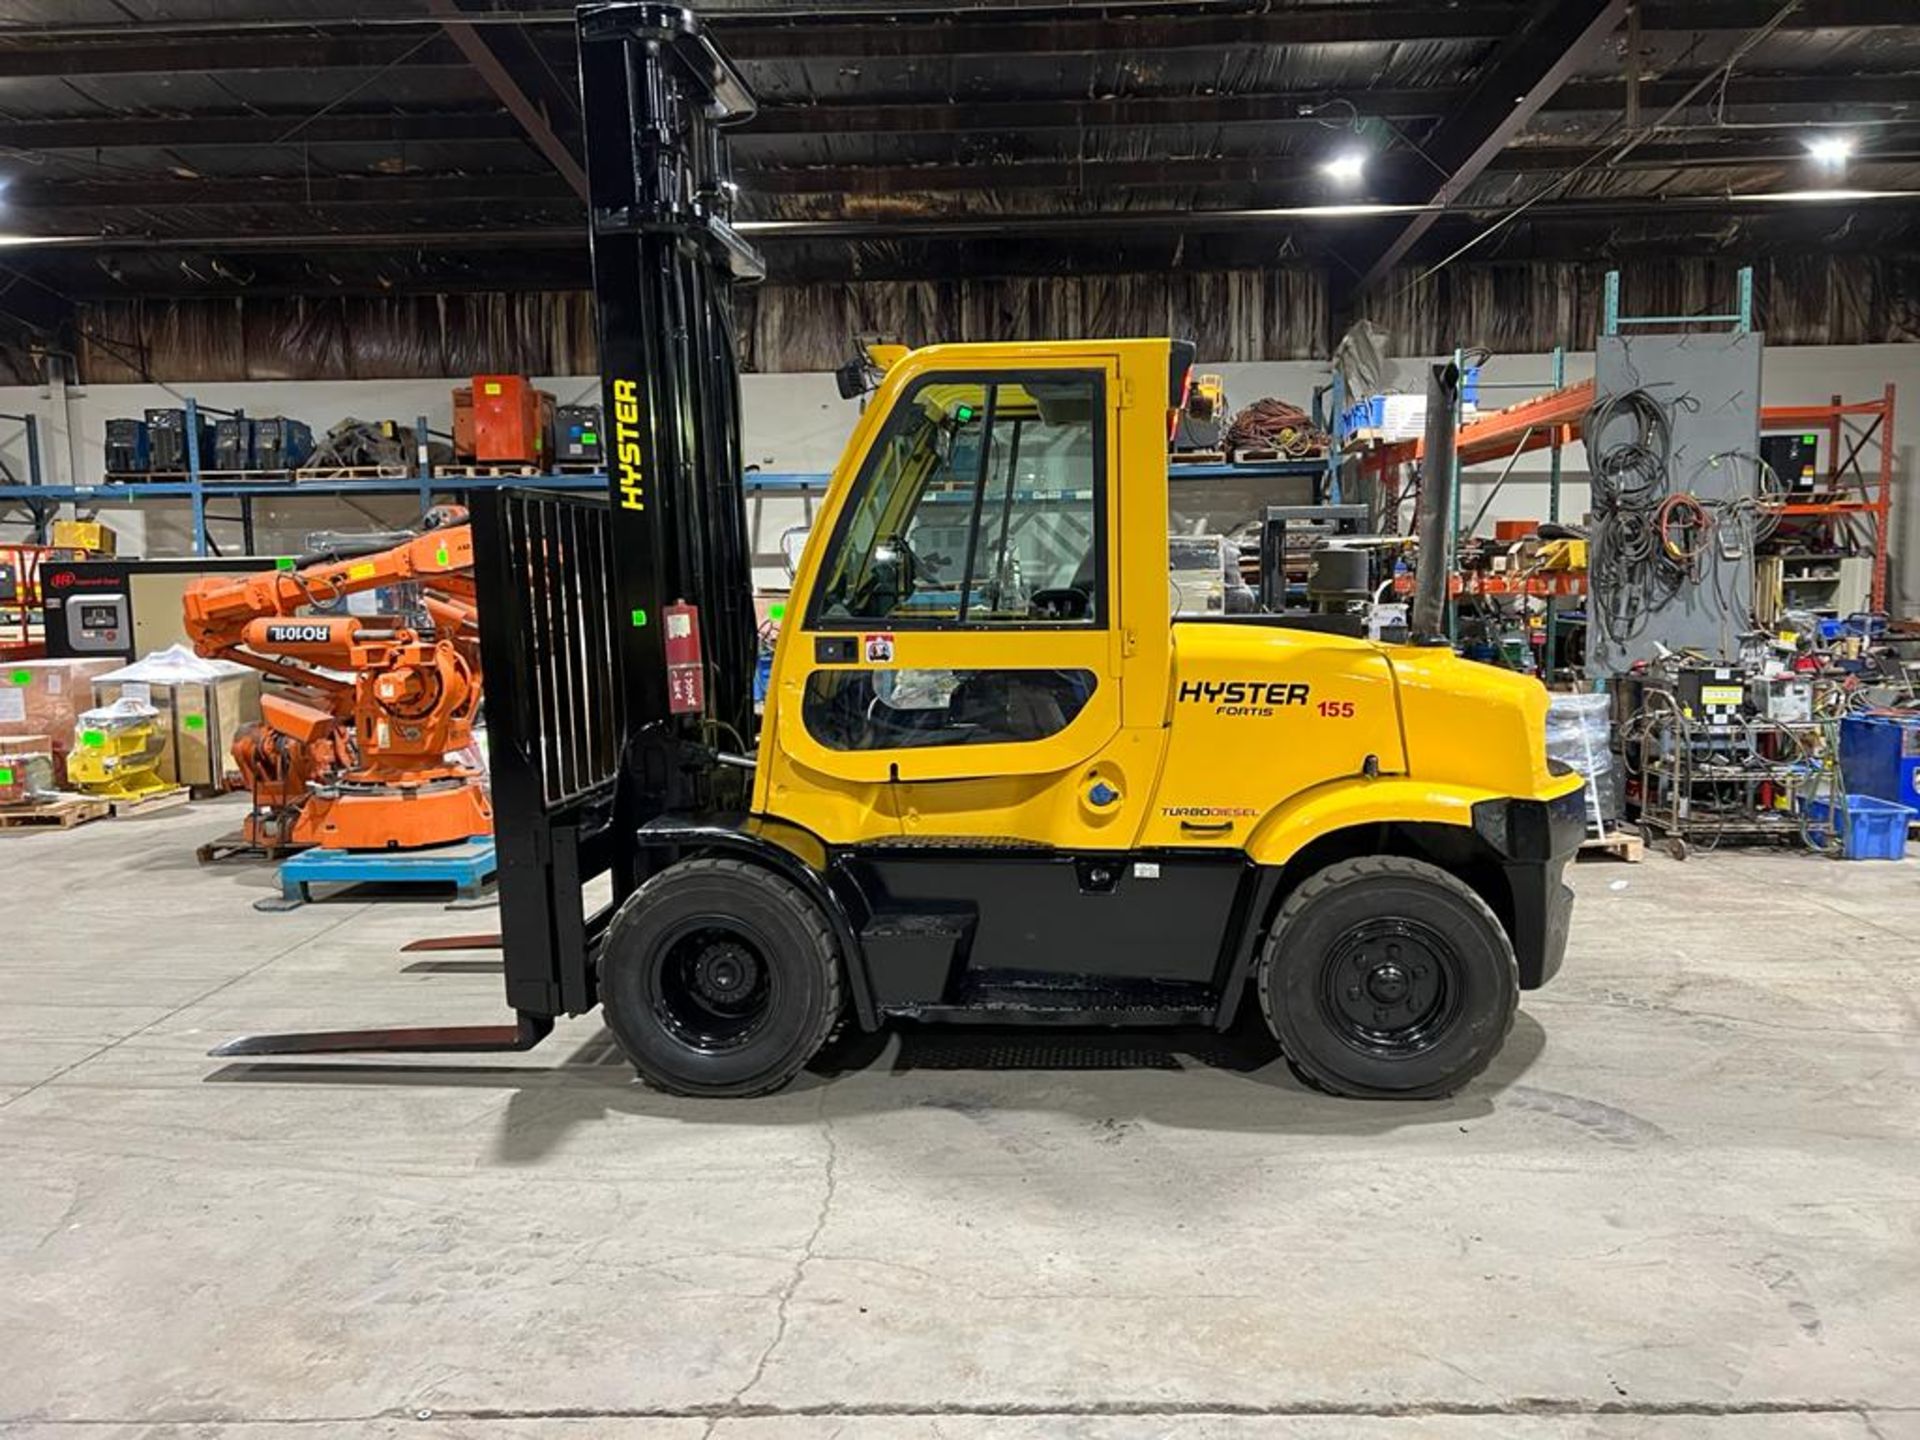 NICE 2017 Hyster model 155 - 15,500lbs Capacity OUTDOOR Forklift Diesel with CAB sideshift - Image 4 of 8